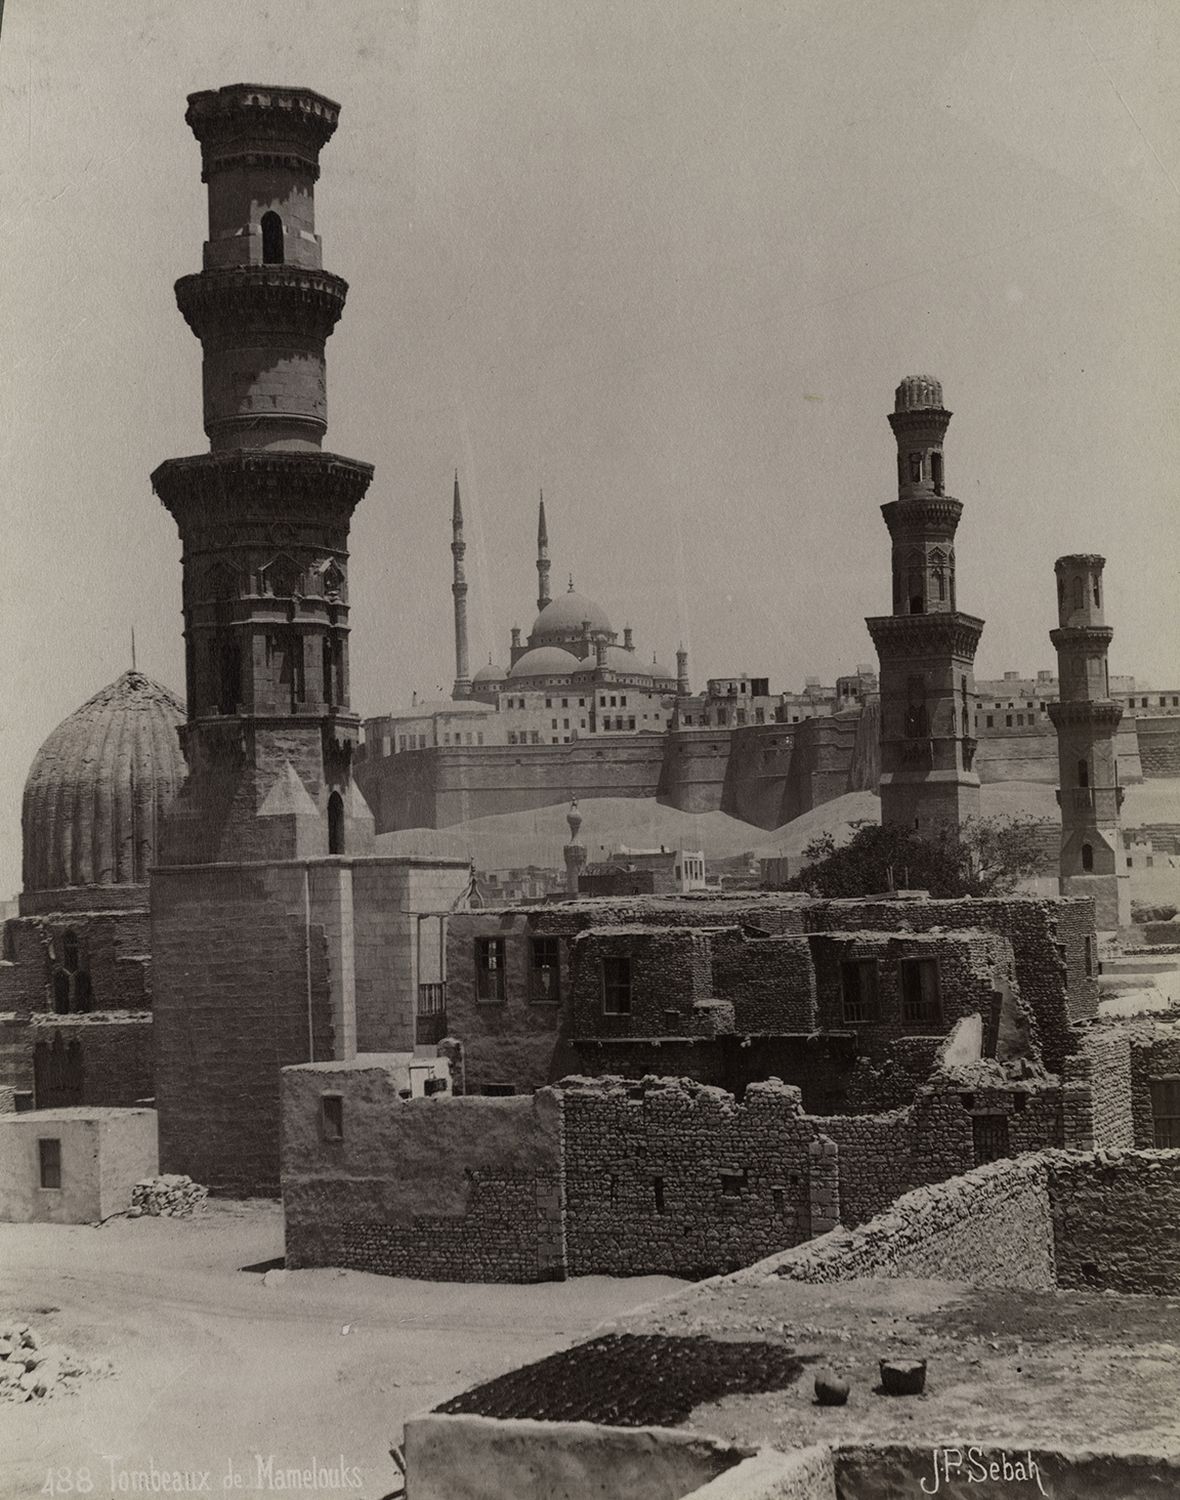 View of monuments in Cairo's Southern Cemetery. In the foreground is the minaret belonging to the Mosque of Amir Qawsun al-Nasiri. The two minarets in the background belong to the Sultaniyya Complex.